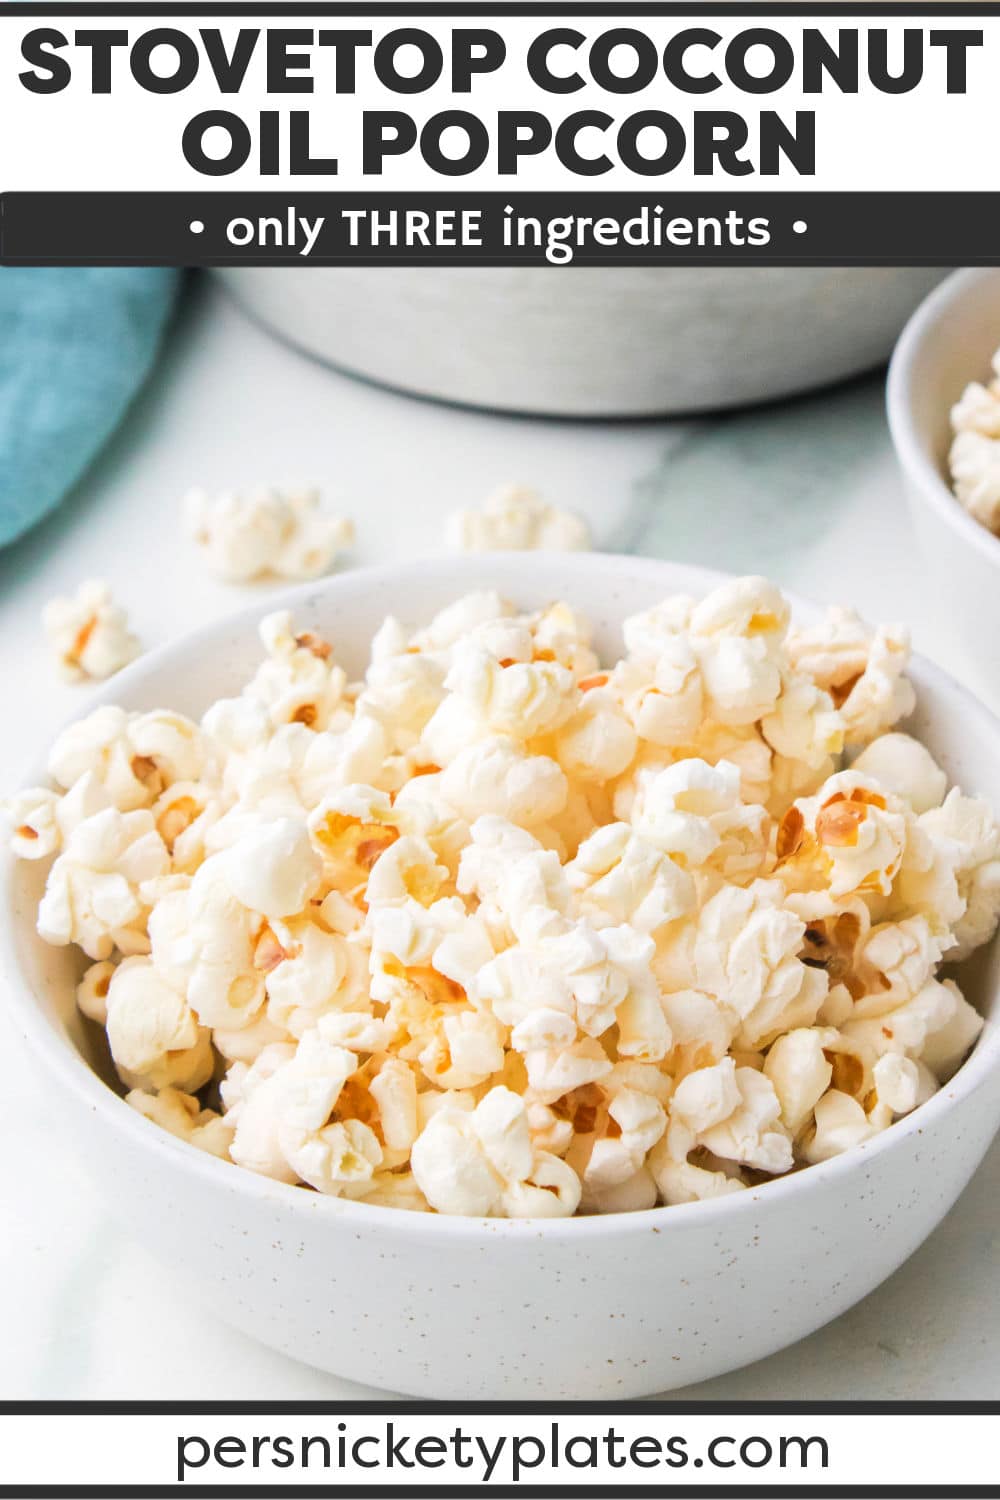 Healthy coconut oil popcorn makes the perfect snack! Full of buttery flavor without any of the butter. Made with just two ingredients and then topped with your favorite seasonings. | www.persnicketyplates.com